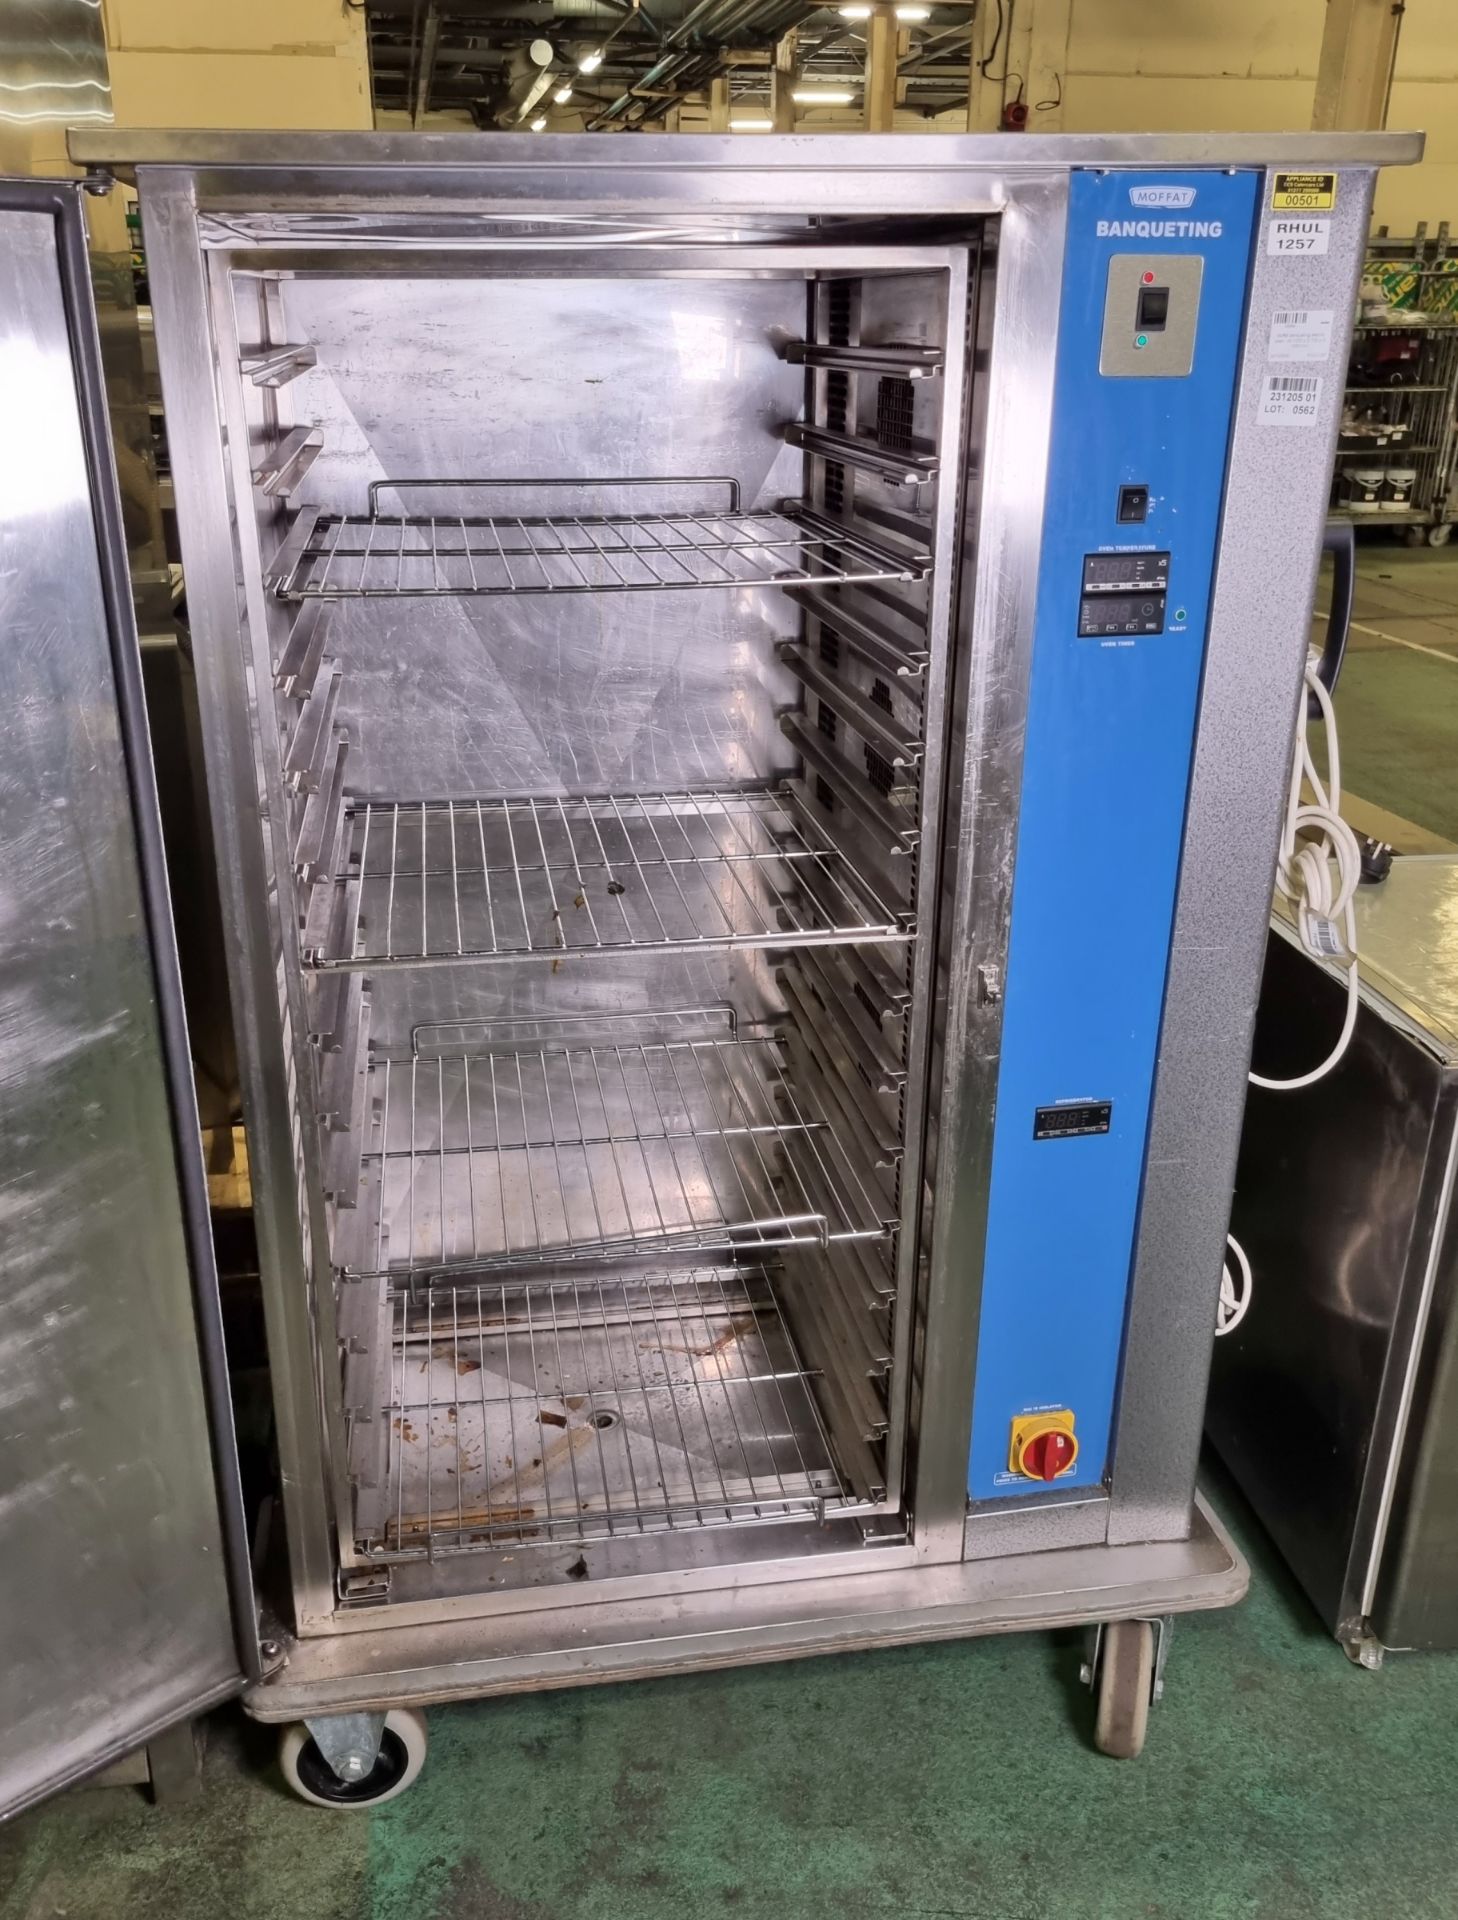 Moffat banqueting electric oven - W 1000 x D 700 x H 1580mm - Image 3 of 5